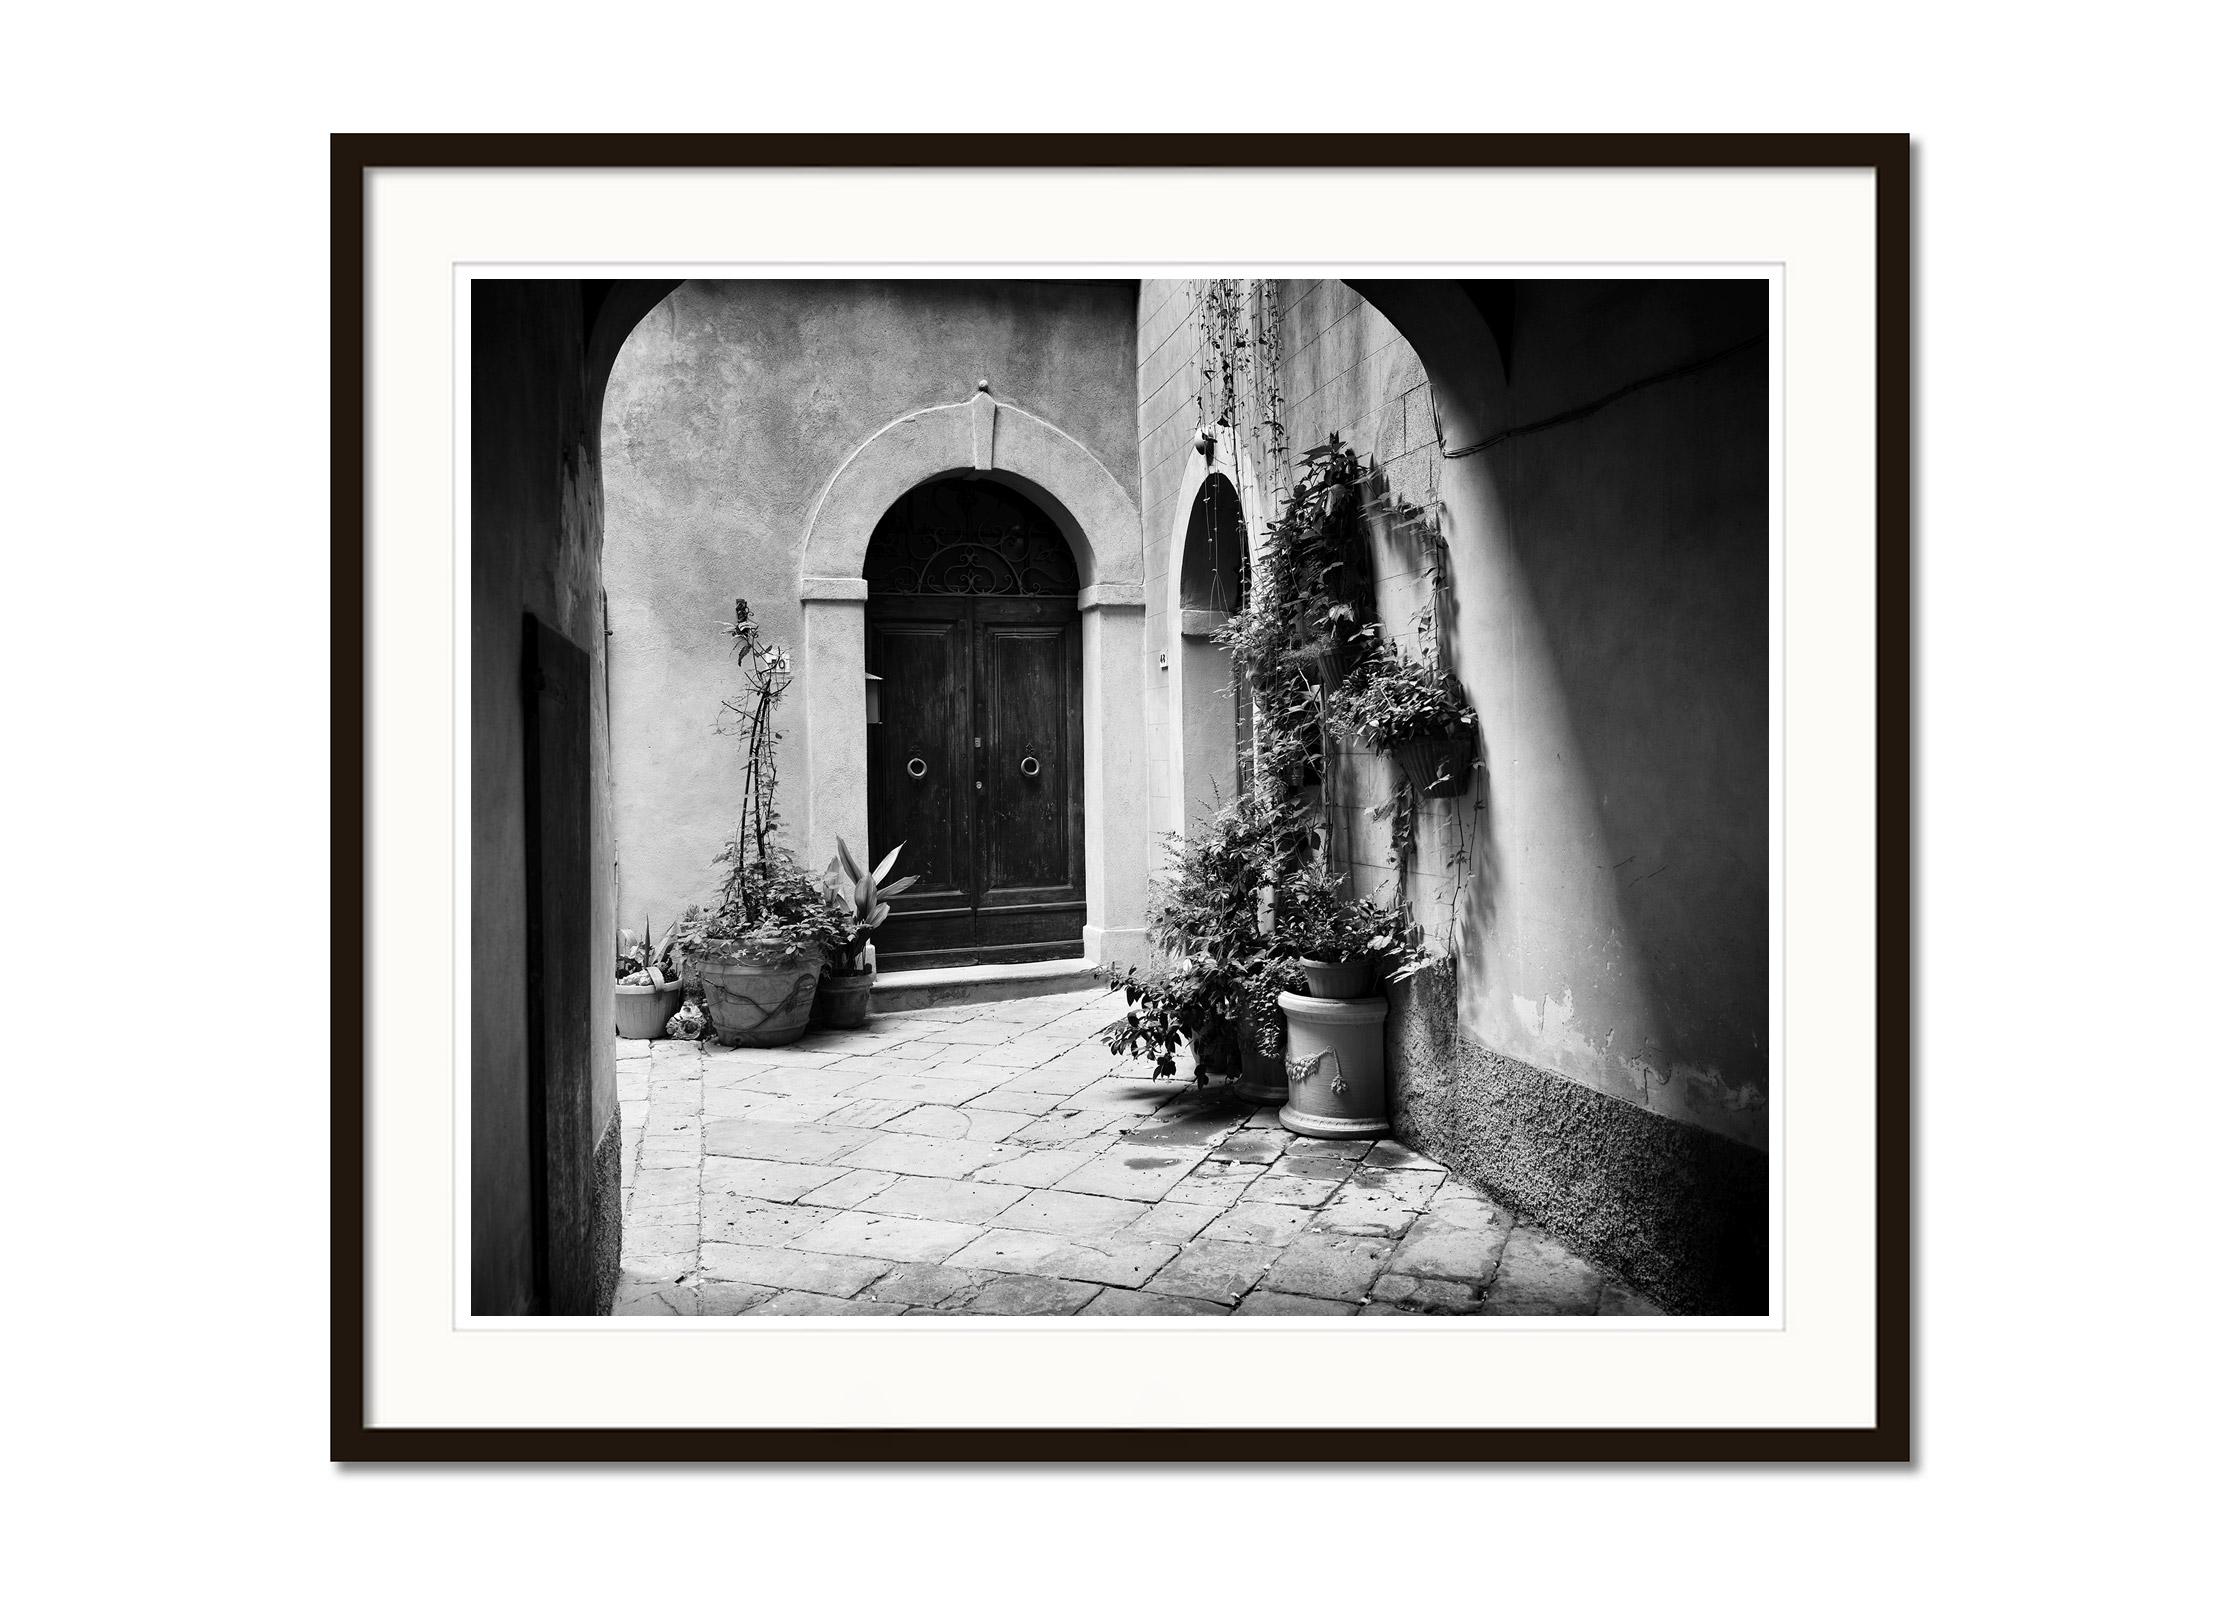 Black and white fine art cityscape - landscape photography. Beautiful courtyard with plants and an old front door, Tuscany, Itlay. Archival pigment ink print, edition of 8. Signed, titled, dated and numbered by artist. Certificate of authenticity